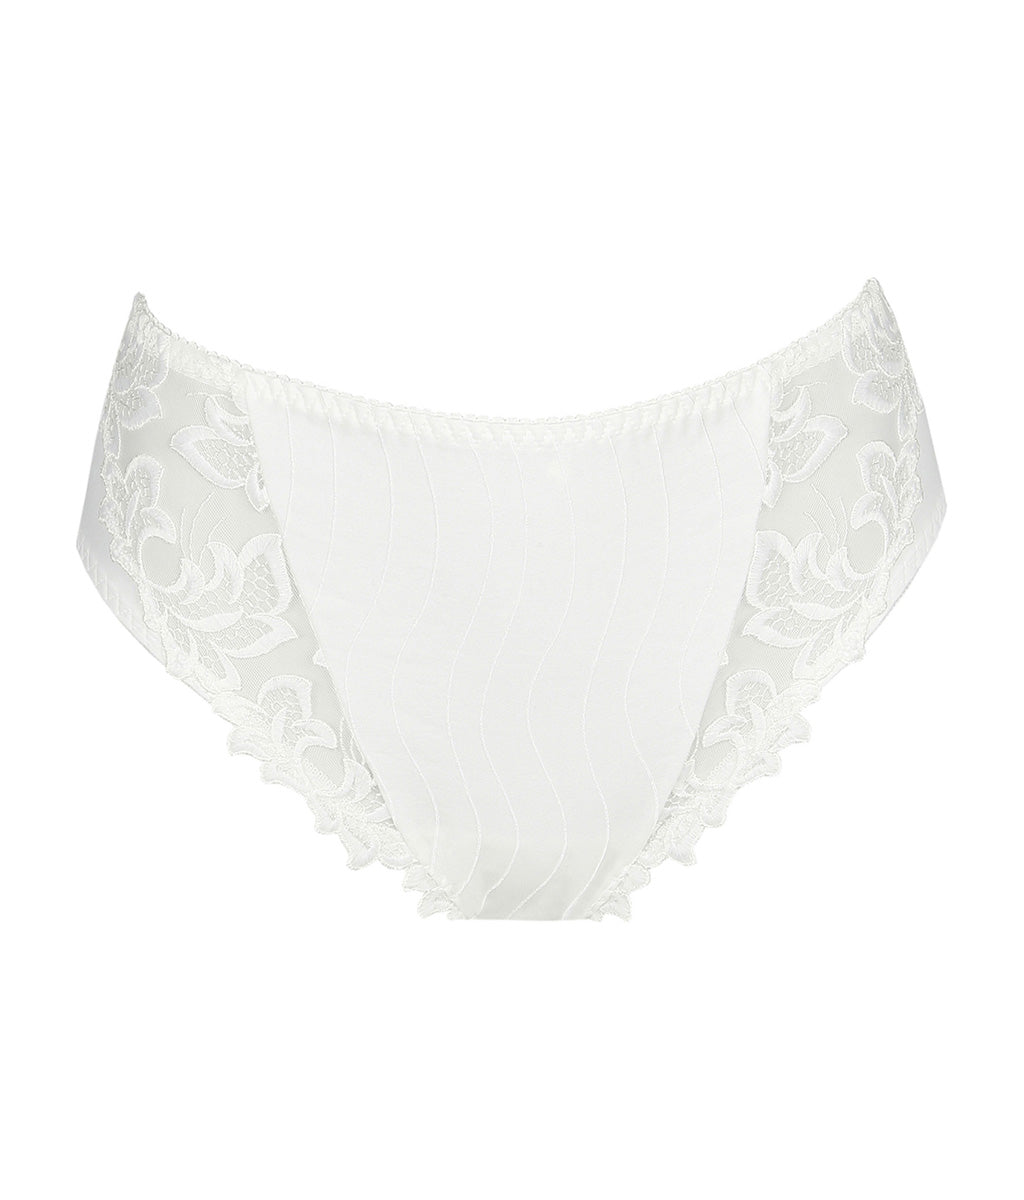 Deauville Full Cup Bra By PrimaDonna